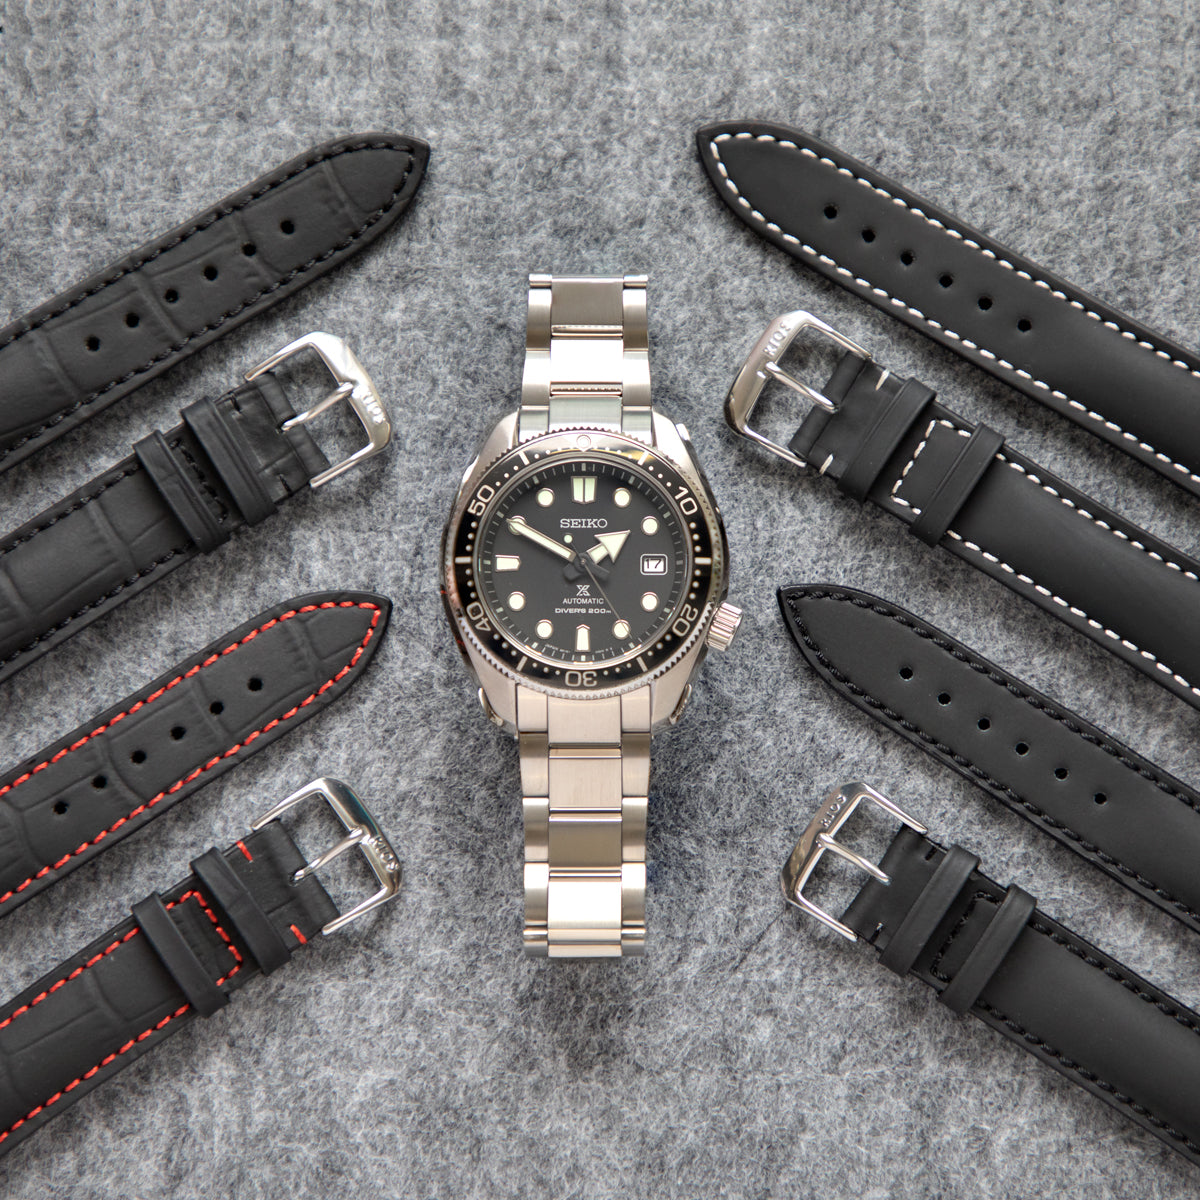 Four water resistant watch straps by Rios1931